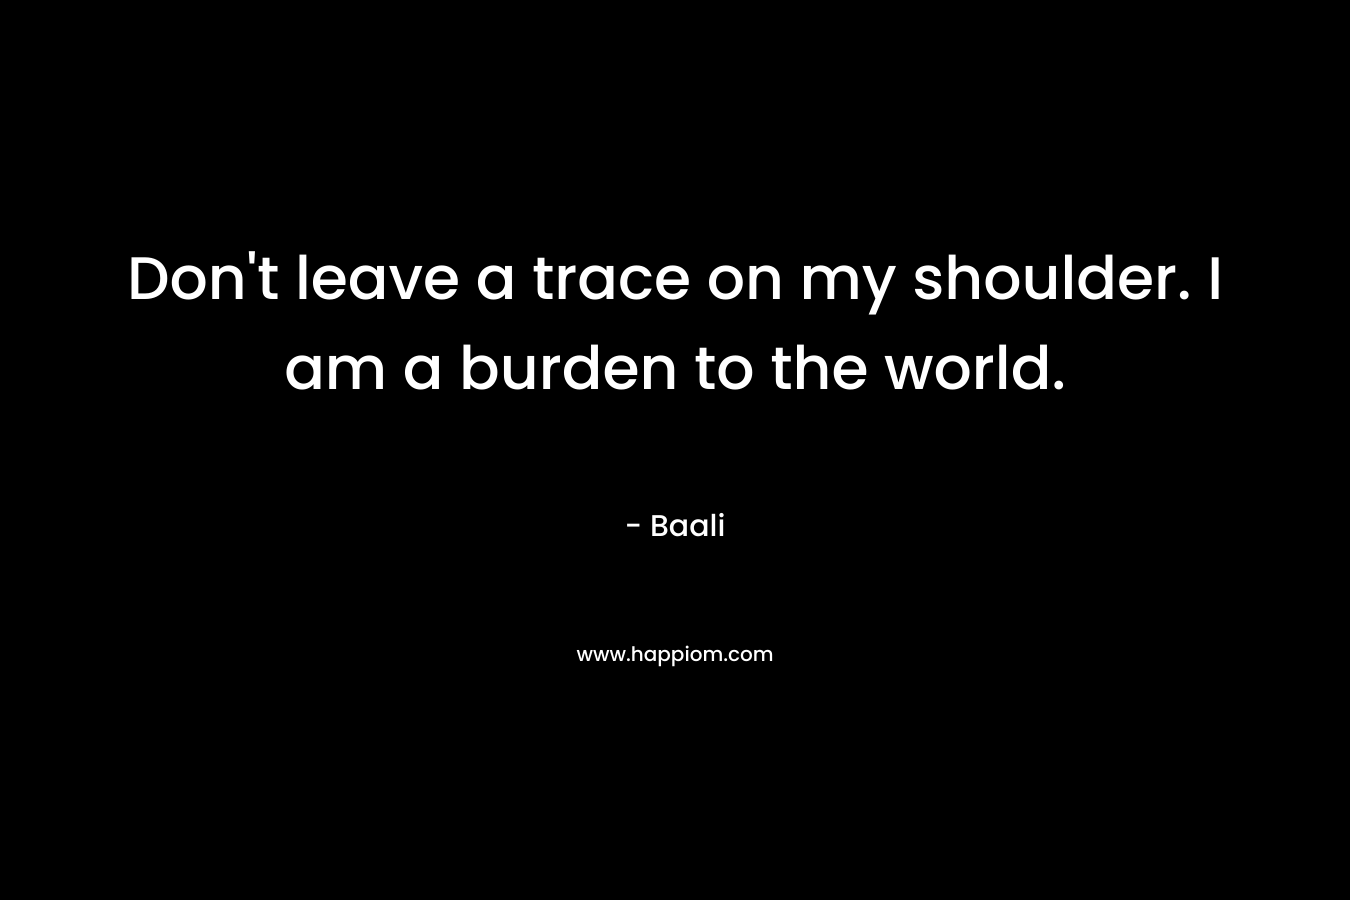 Don't leave a trace on my shoulder. I am a burden to the world.